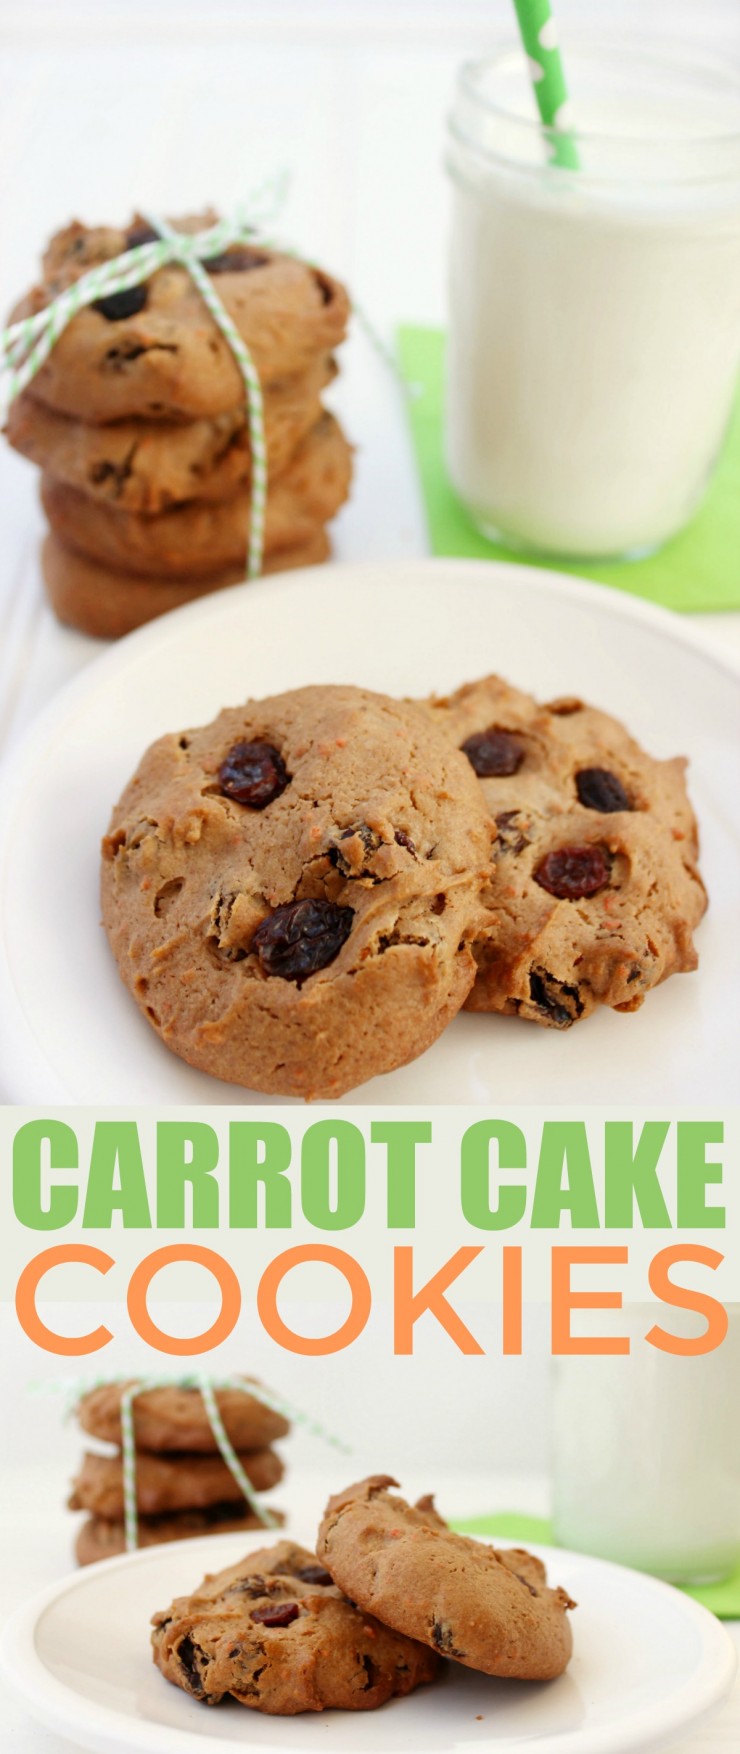  These Carrot Cake Cookies feature all the flavours of carrot cake rolled into tasty, tender cookies! 